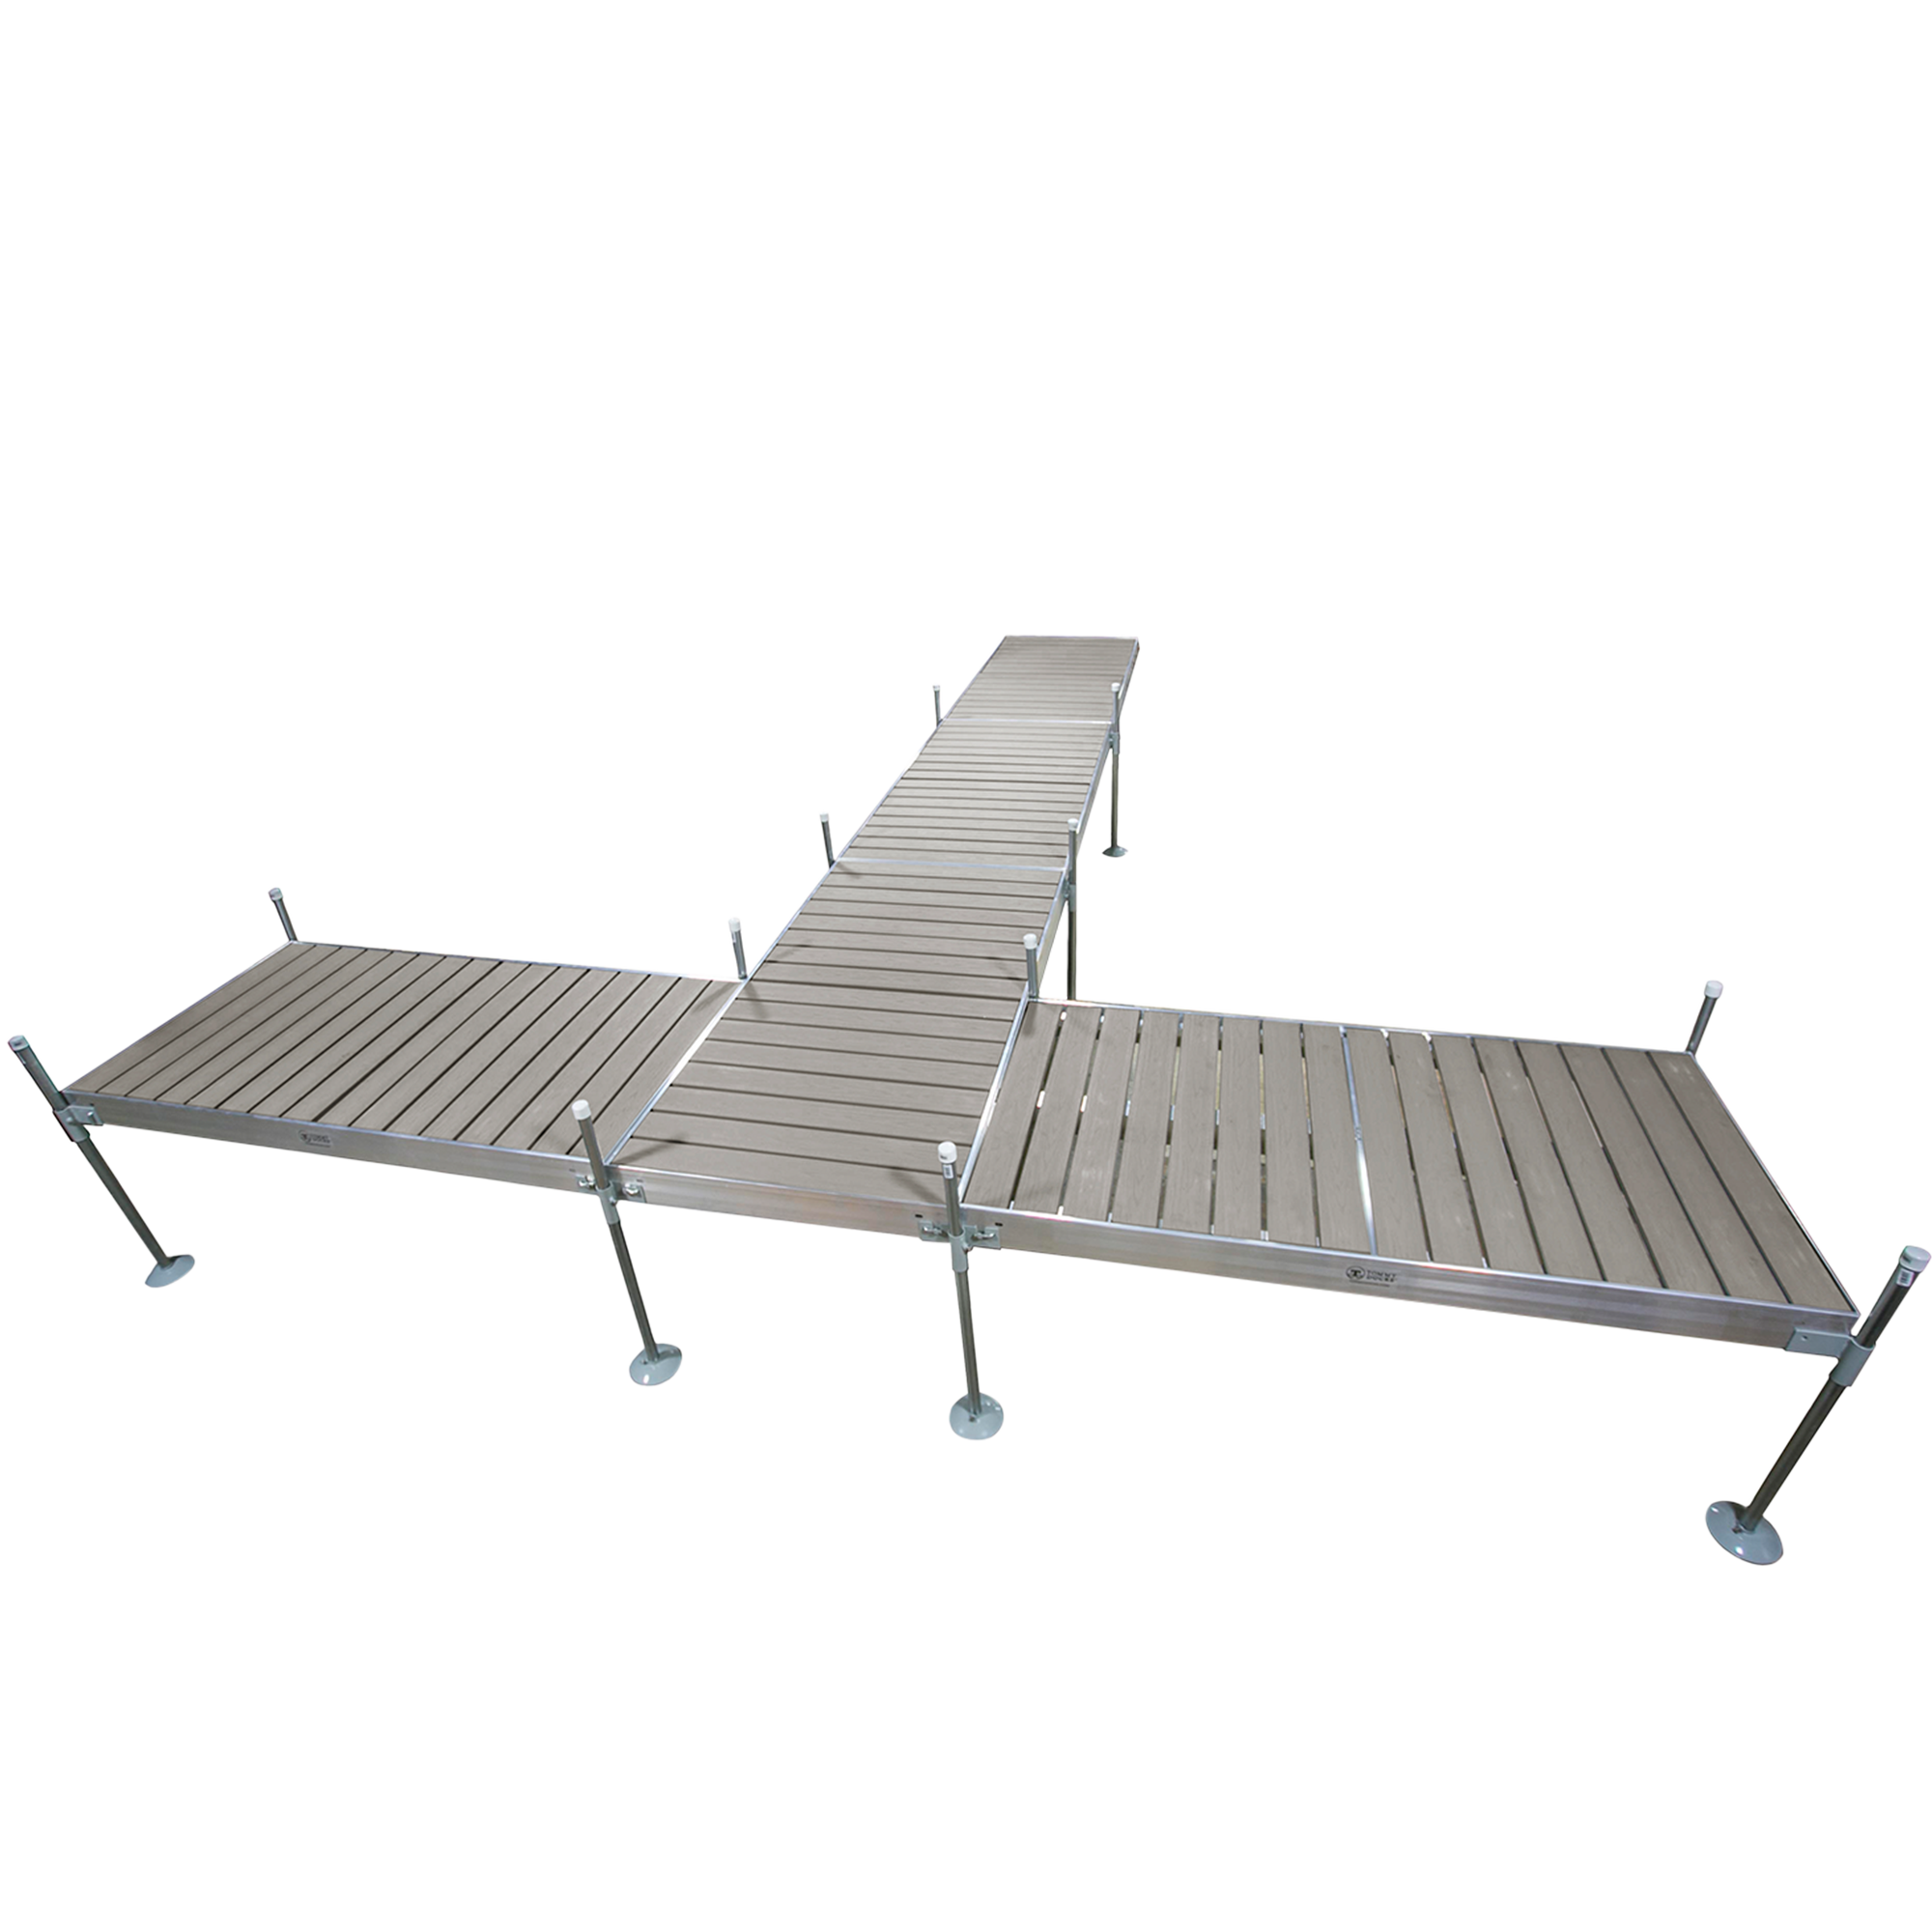 24' T-Shaped Boat Dock System with Aluminum Frame and Gray Composite Decking